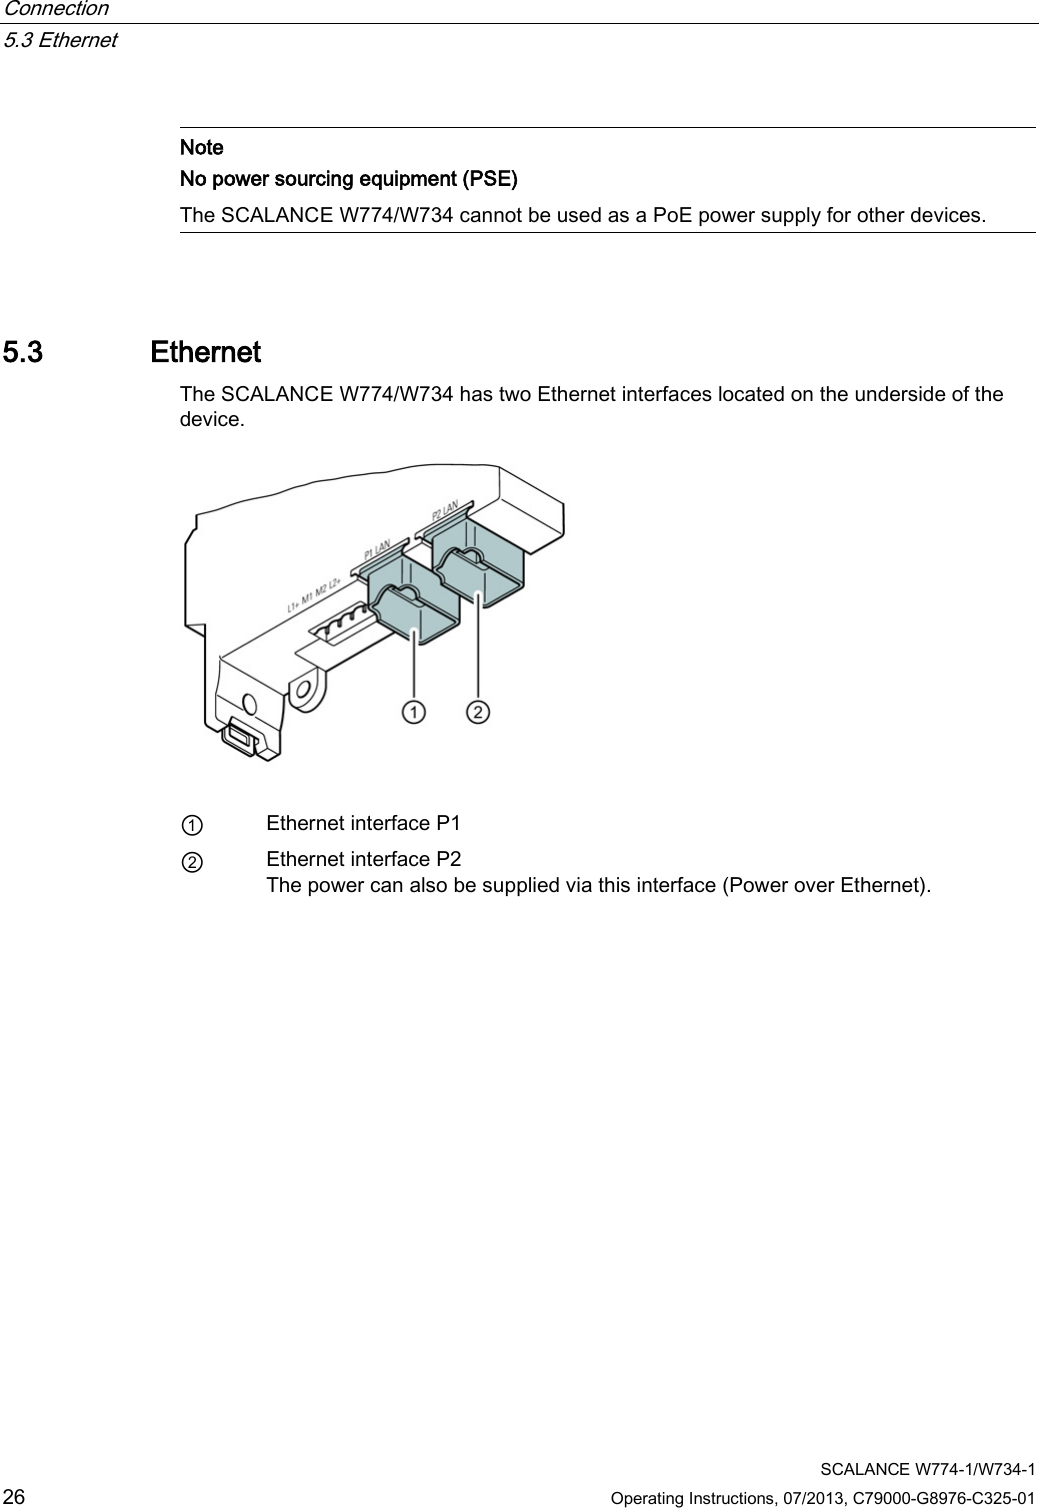 Connection   5.3 Ethernet  SCALANCE W774-1/W734-1 26 Operating Instructions, 07/2013, C79000-G8976-C325-01   Note No power sourcing equipment (PSE) The SCALANCE W774/W734 cannot be used as a PoE power supply for other devices.  5.3 Ethernet The SCALANCE W774/W734 has two Ethernet interfaces located on the underside of the device.   ① Ethernet interface P1 ② Ethernet interface P2 The power can also be supplied via this interface (Power over Ethernet). 